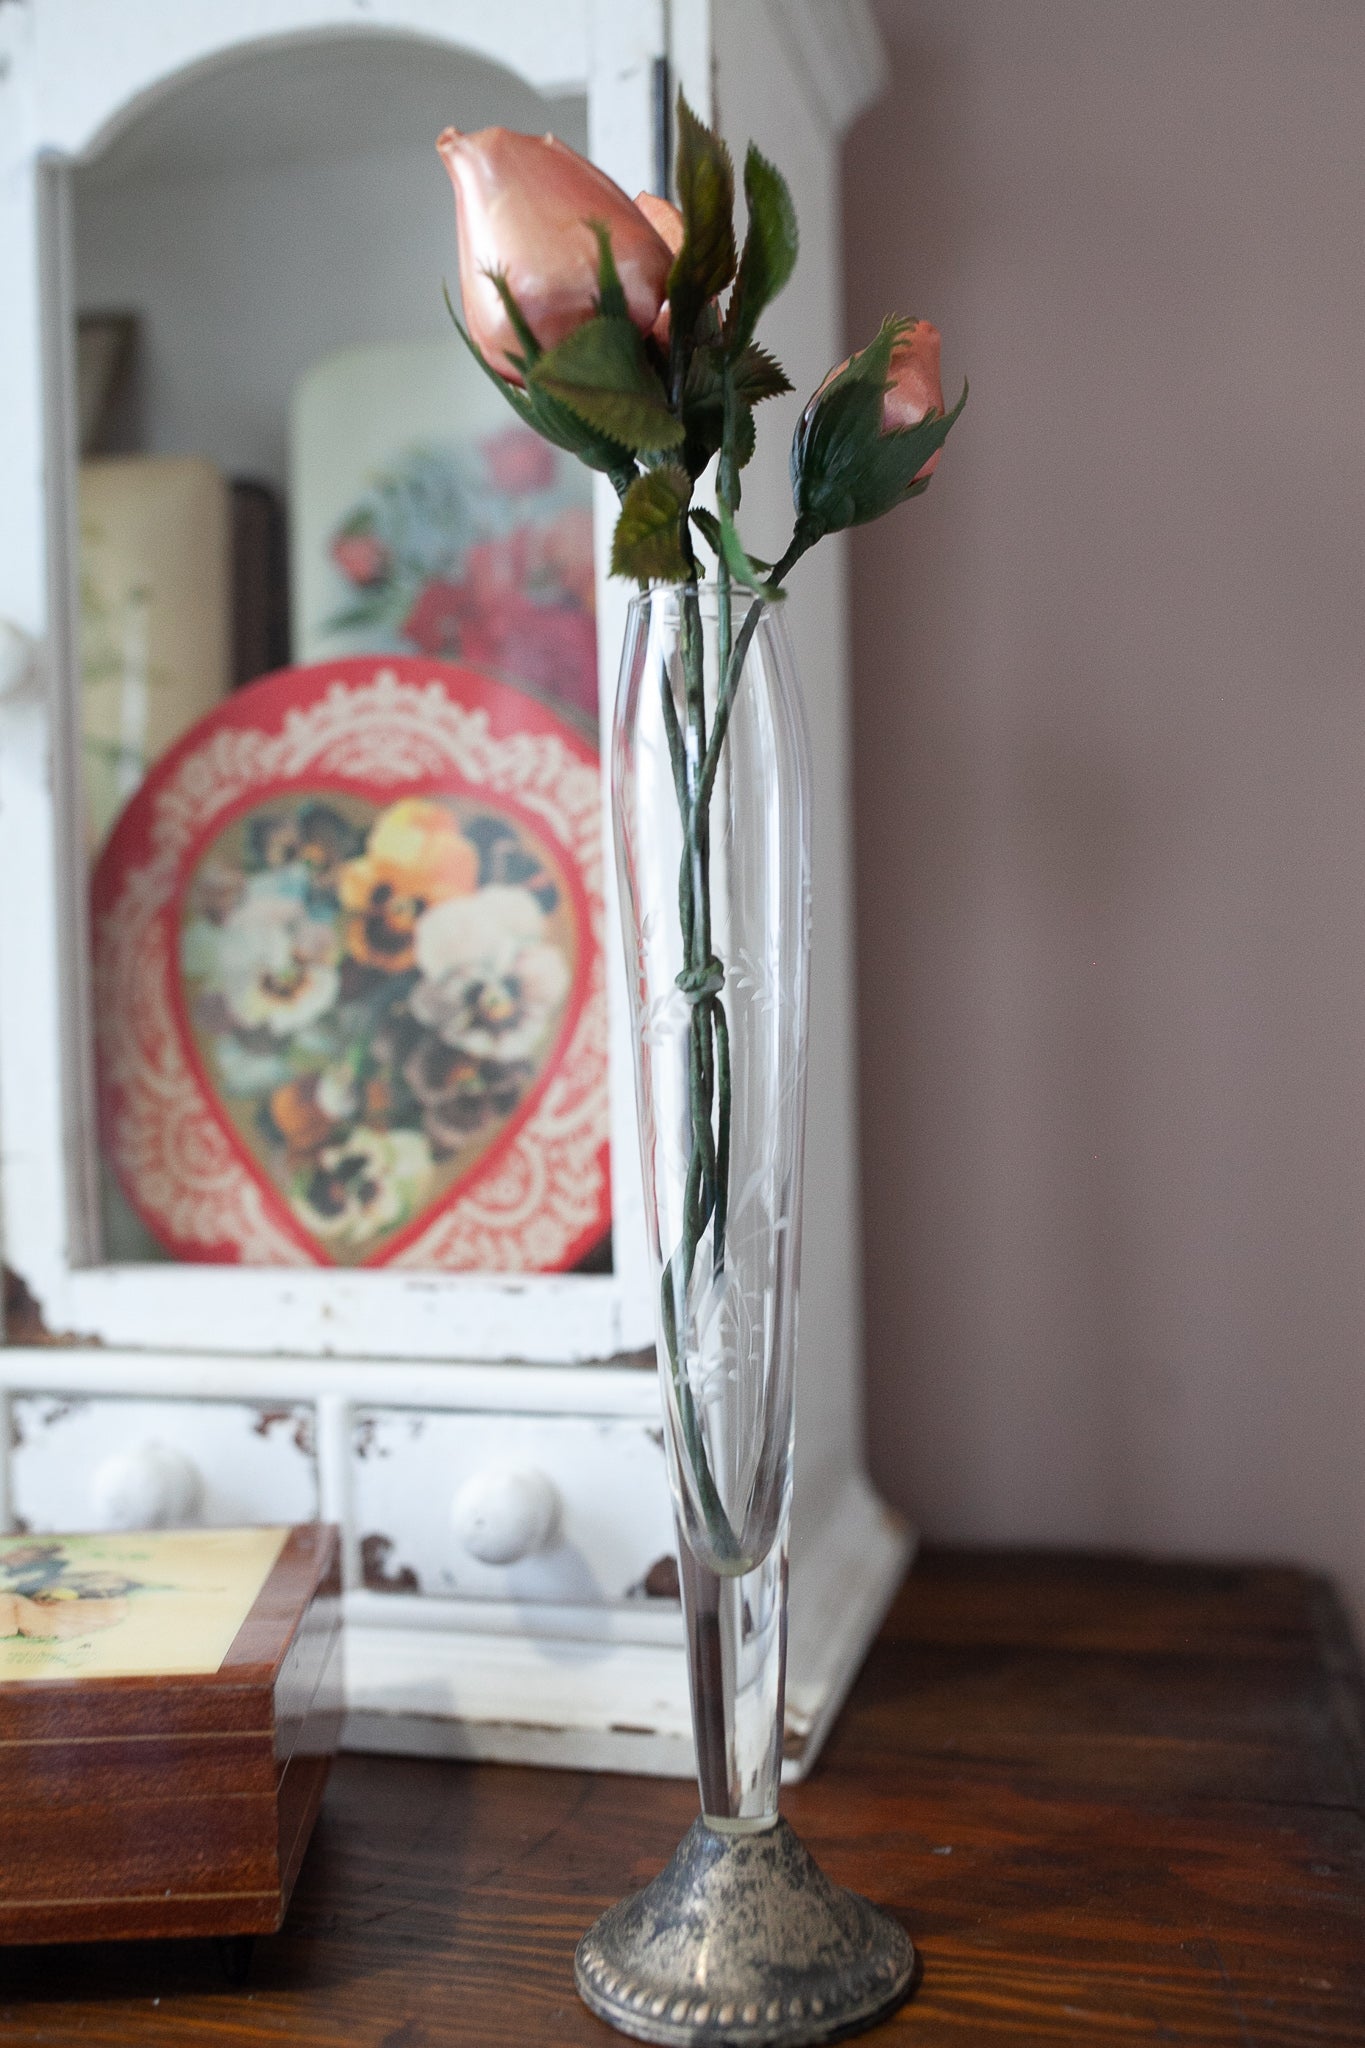 Antique Vase and flowers